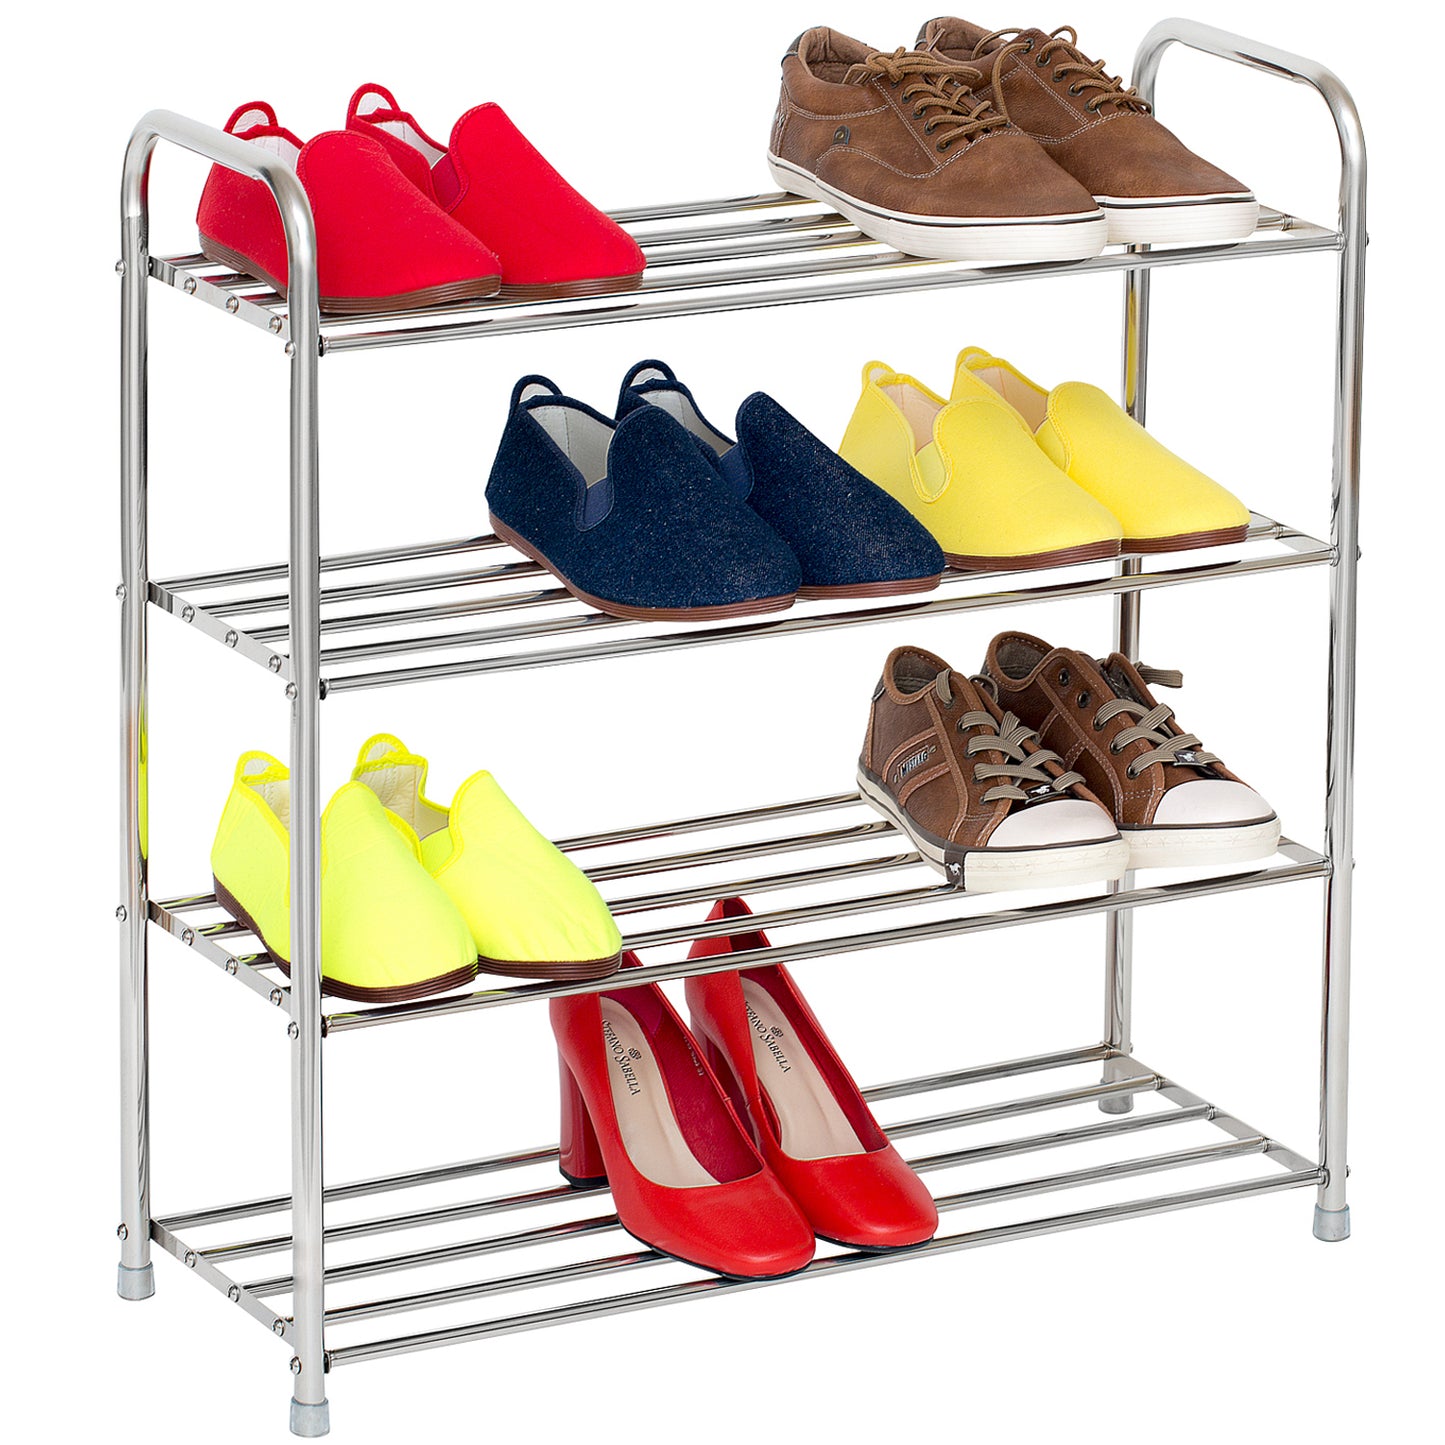 Tatkraft Good - Stainless Steel 4 Tier Shoe Rack, Stable, Durable and Sturdy, Holds up to 12 Pairs of Shoes